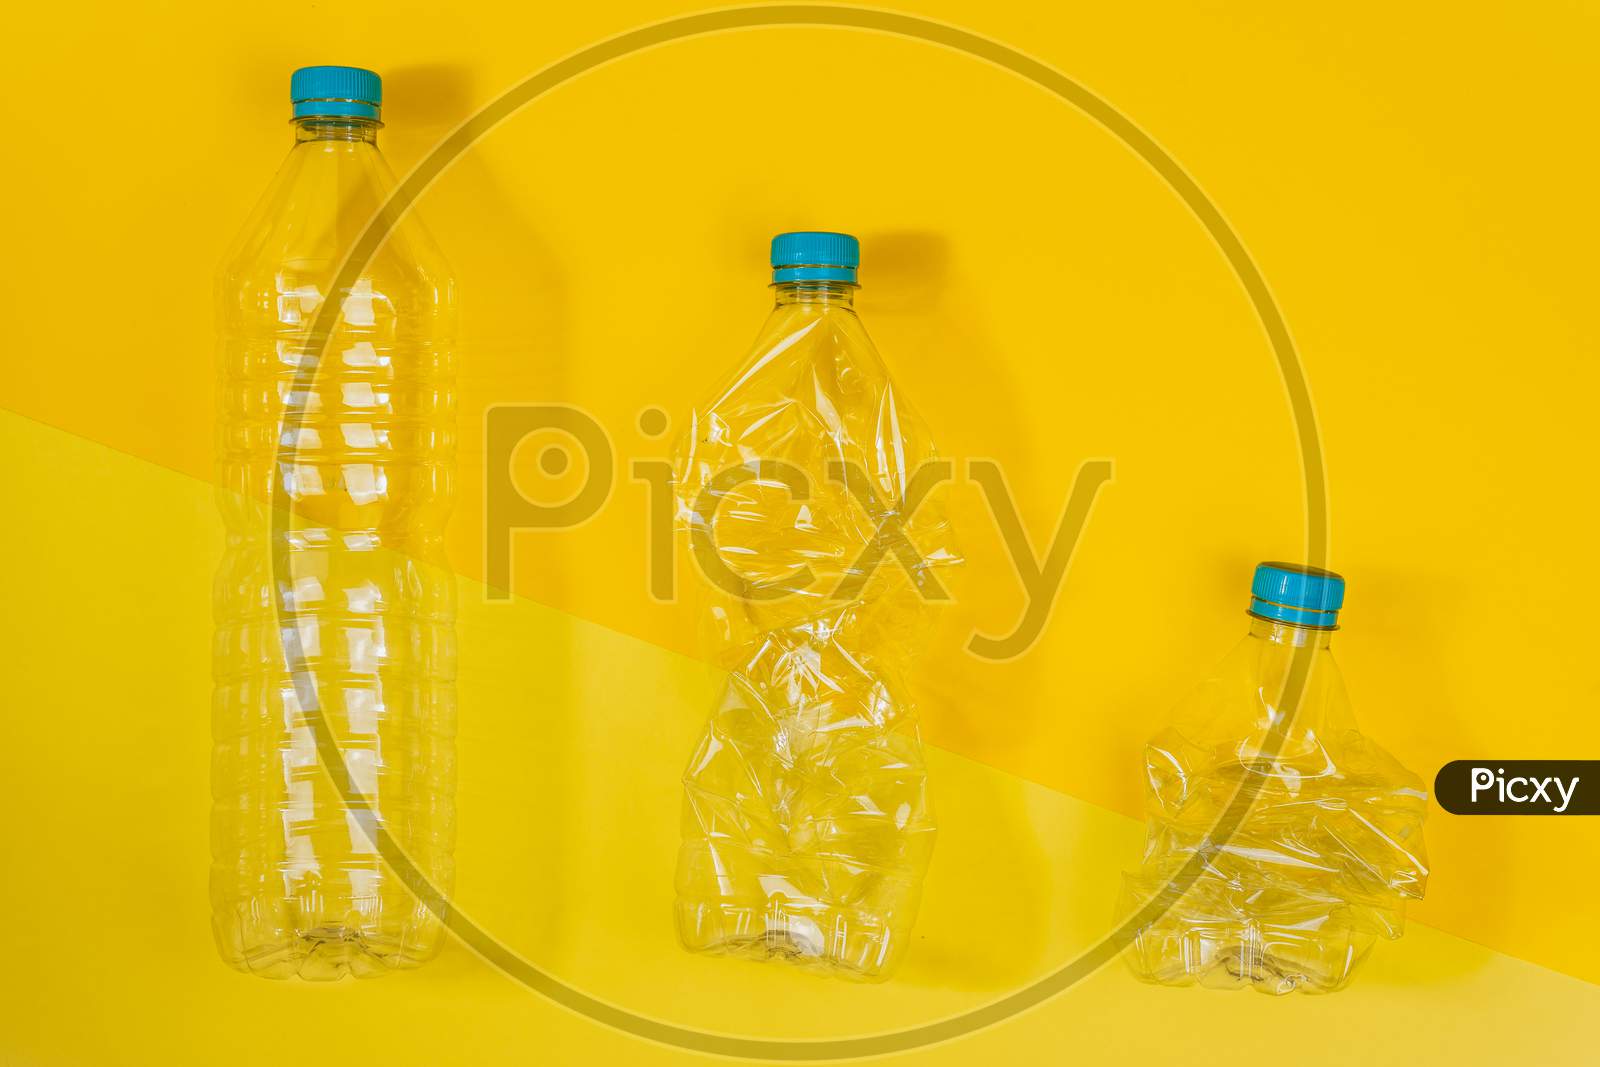 Transparent And Crushed Plastic Bottles With Blue Caps On A Yellow Background. Recycling And Environment Concept.